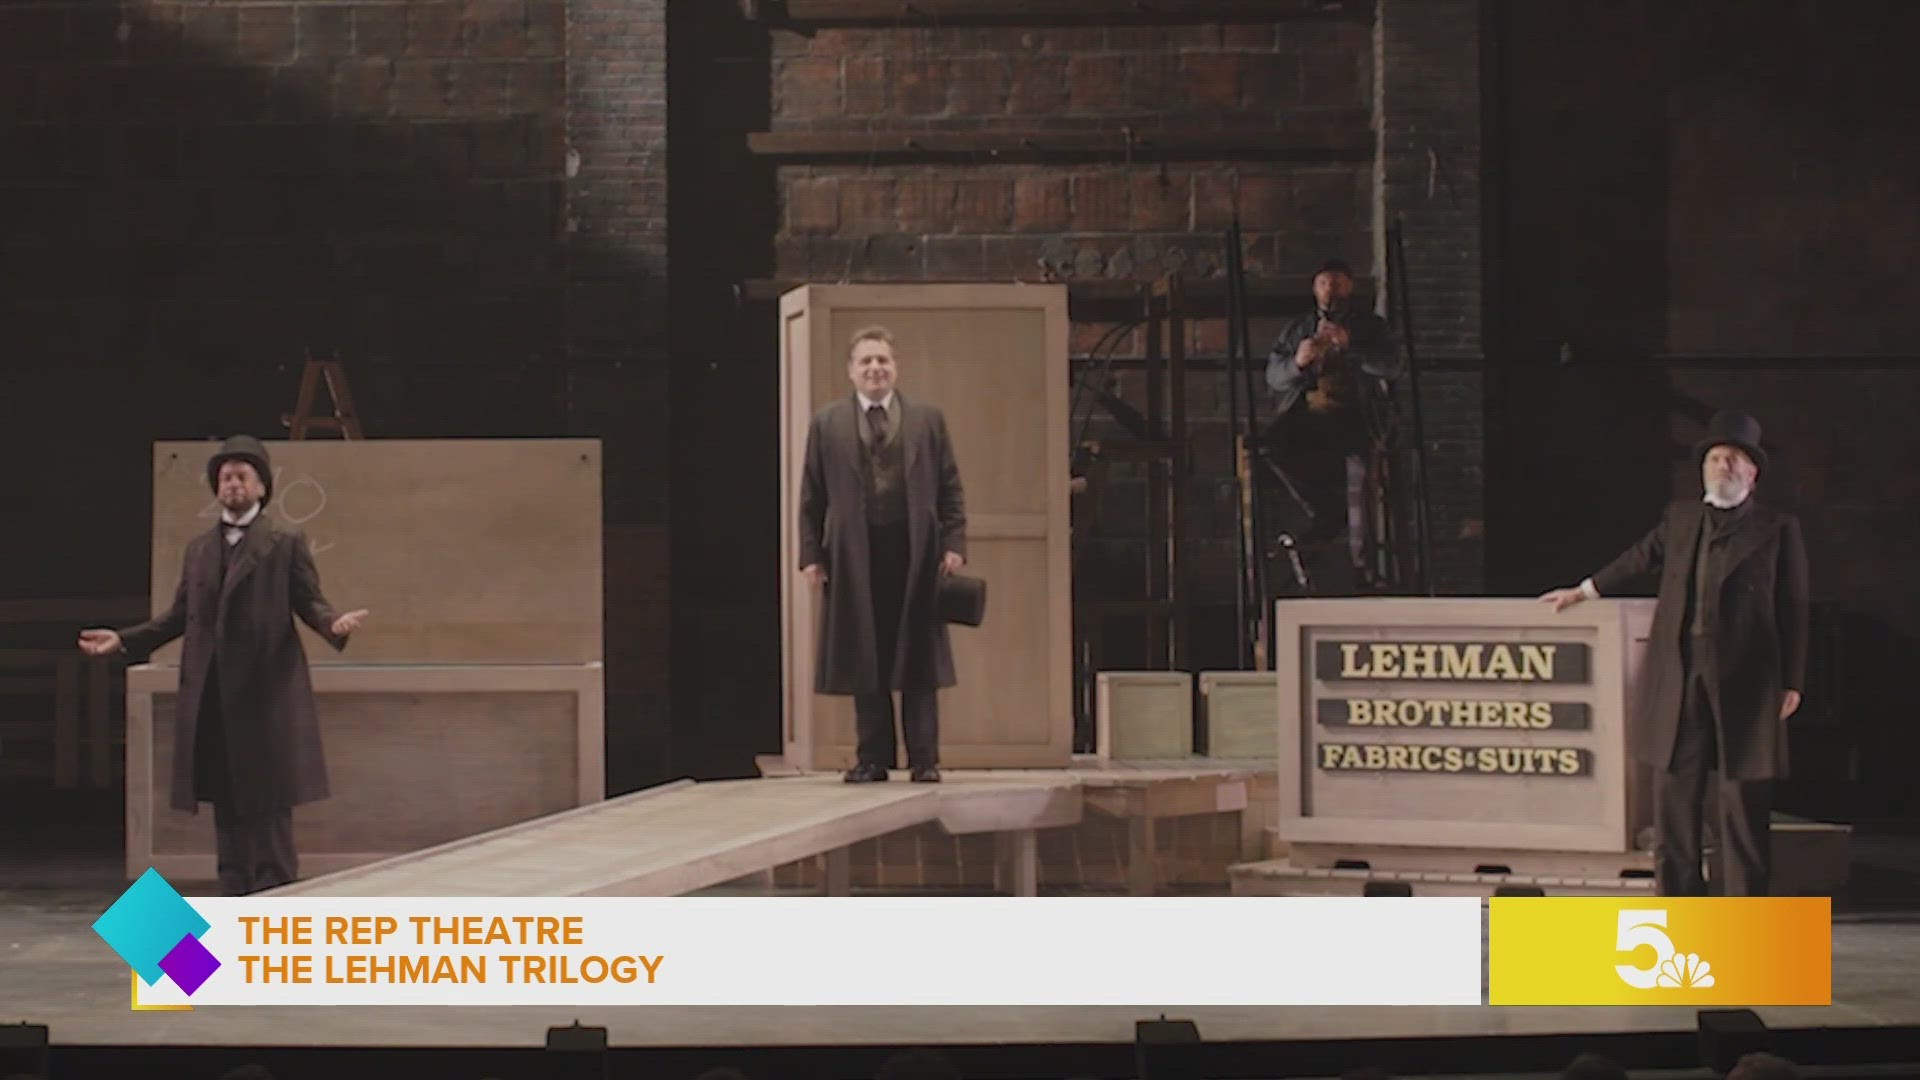 You can win the Ultimate Theatrical Experience by entering our giveaway for a chance to secure a pair of tickets to witness The Lehman Trilogy at The Rep!